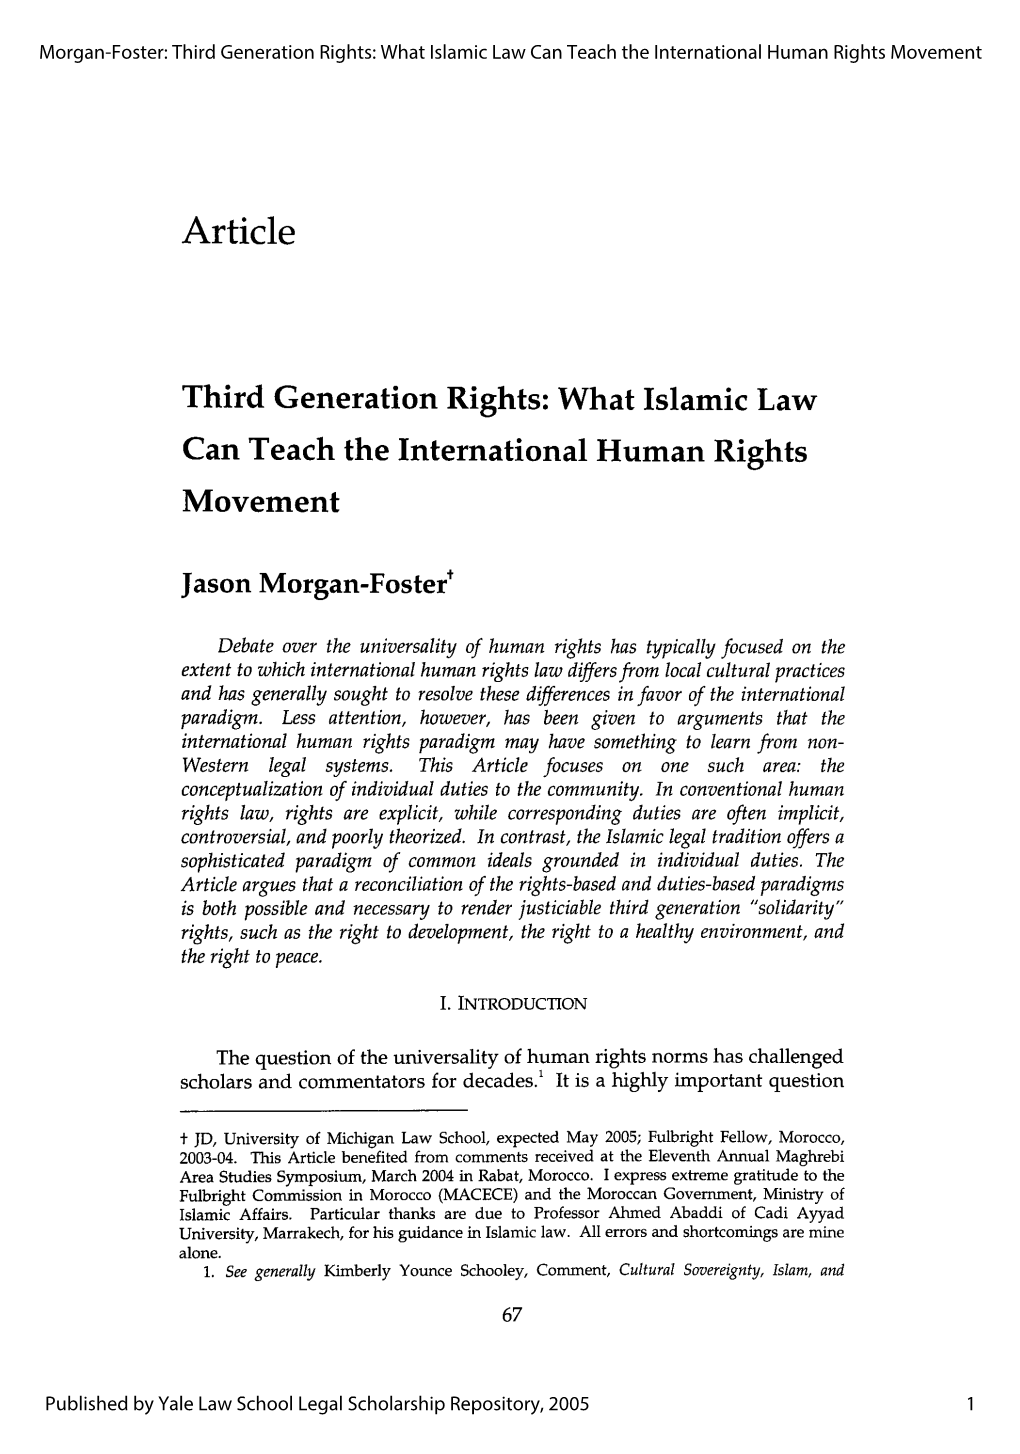 Third Generation Rights: What Islamic Law Can Teach the International Human Rights Movement